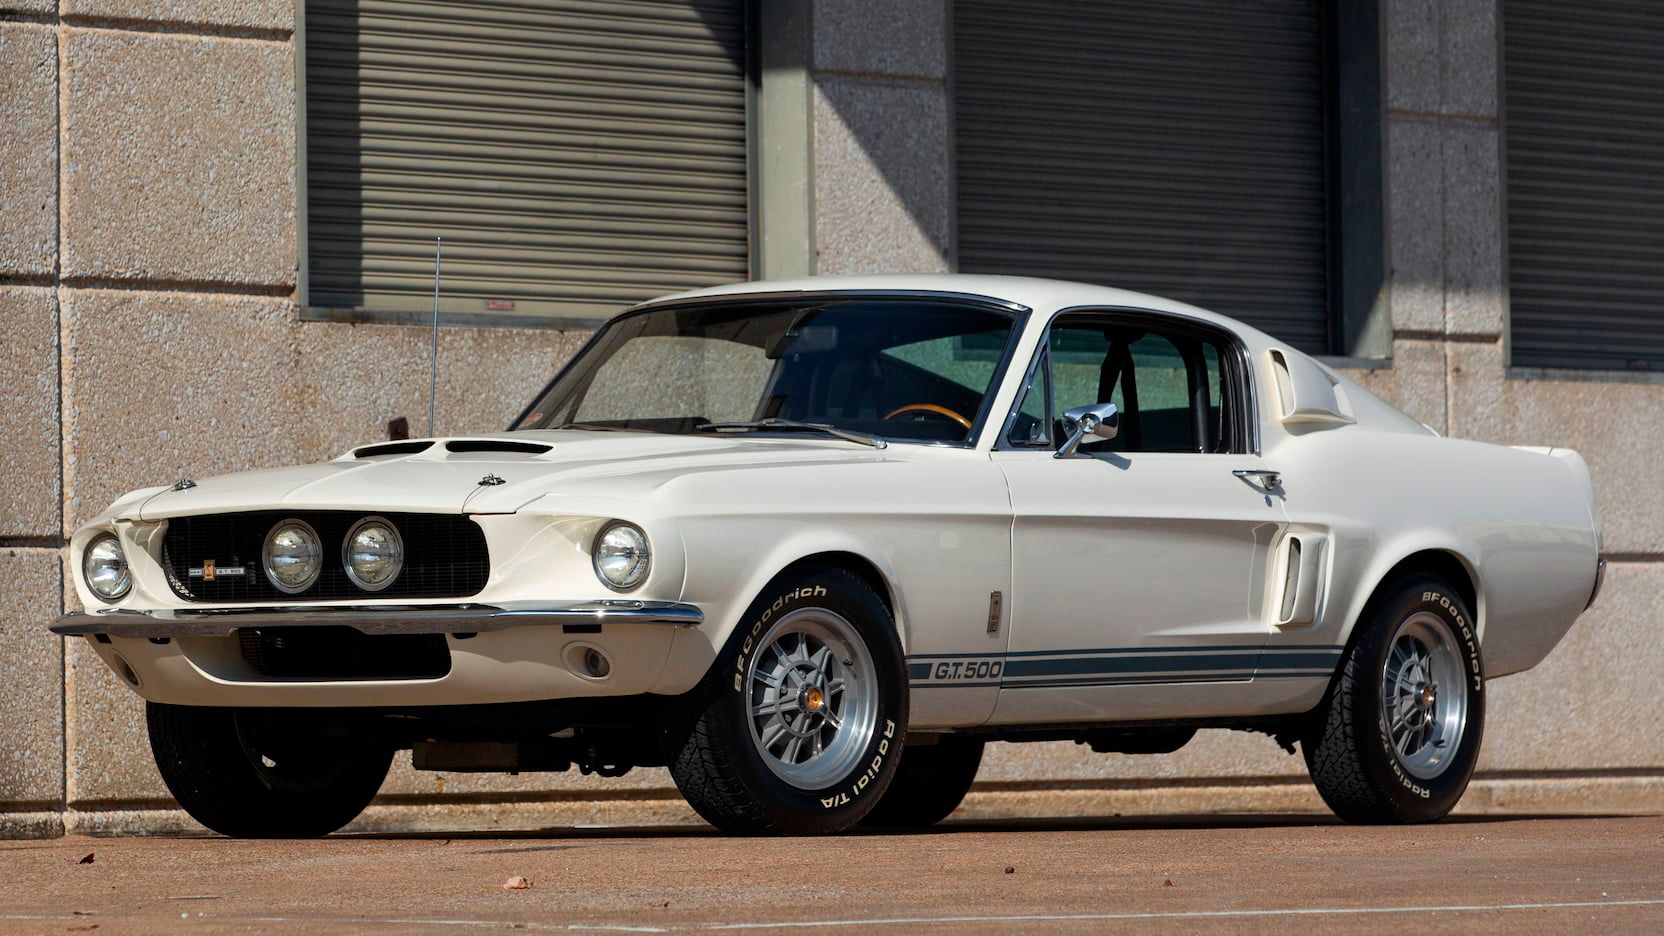 A parked 1967 Shelby Gt500